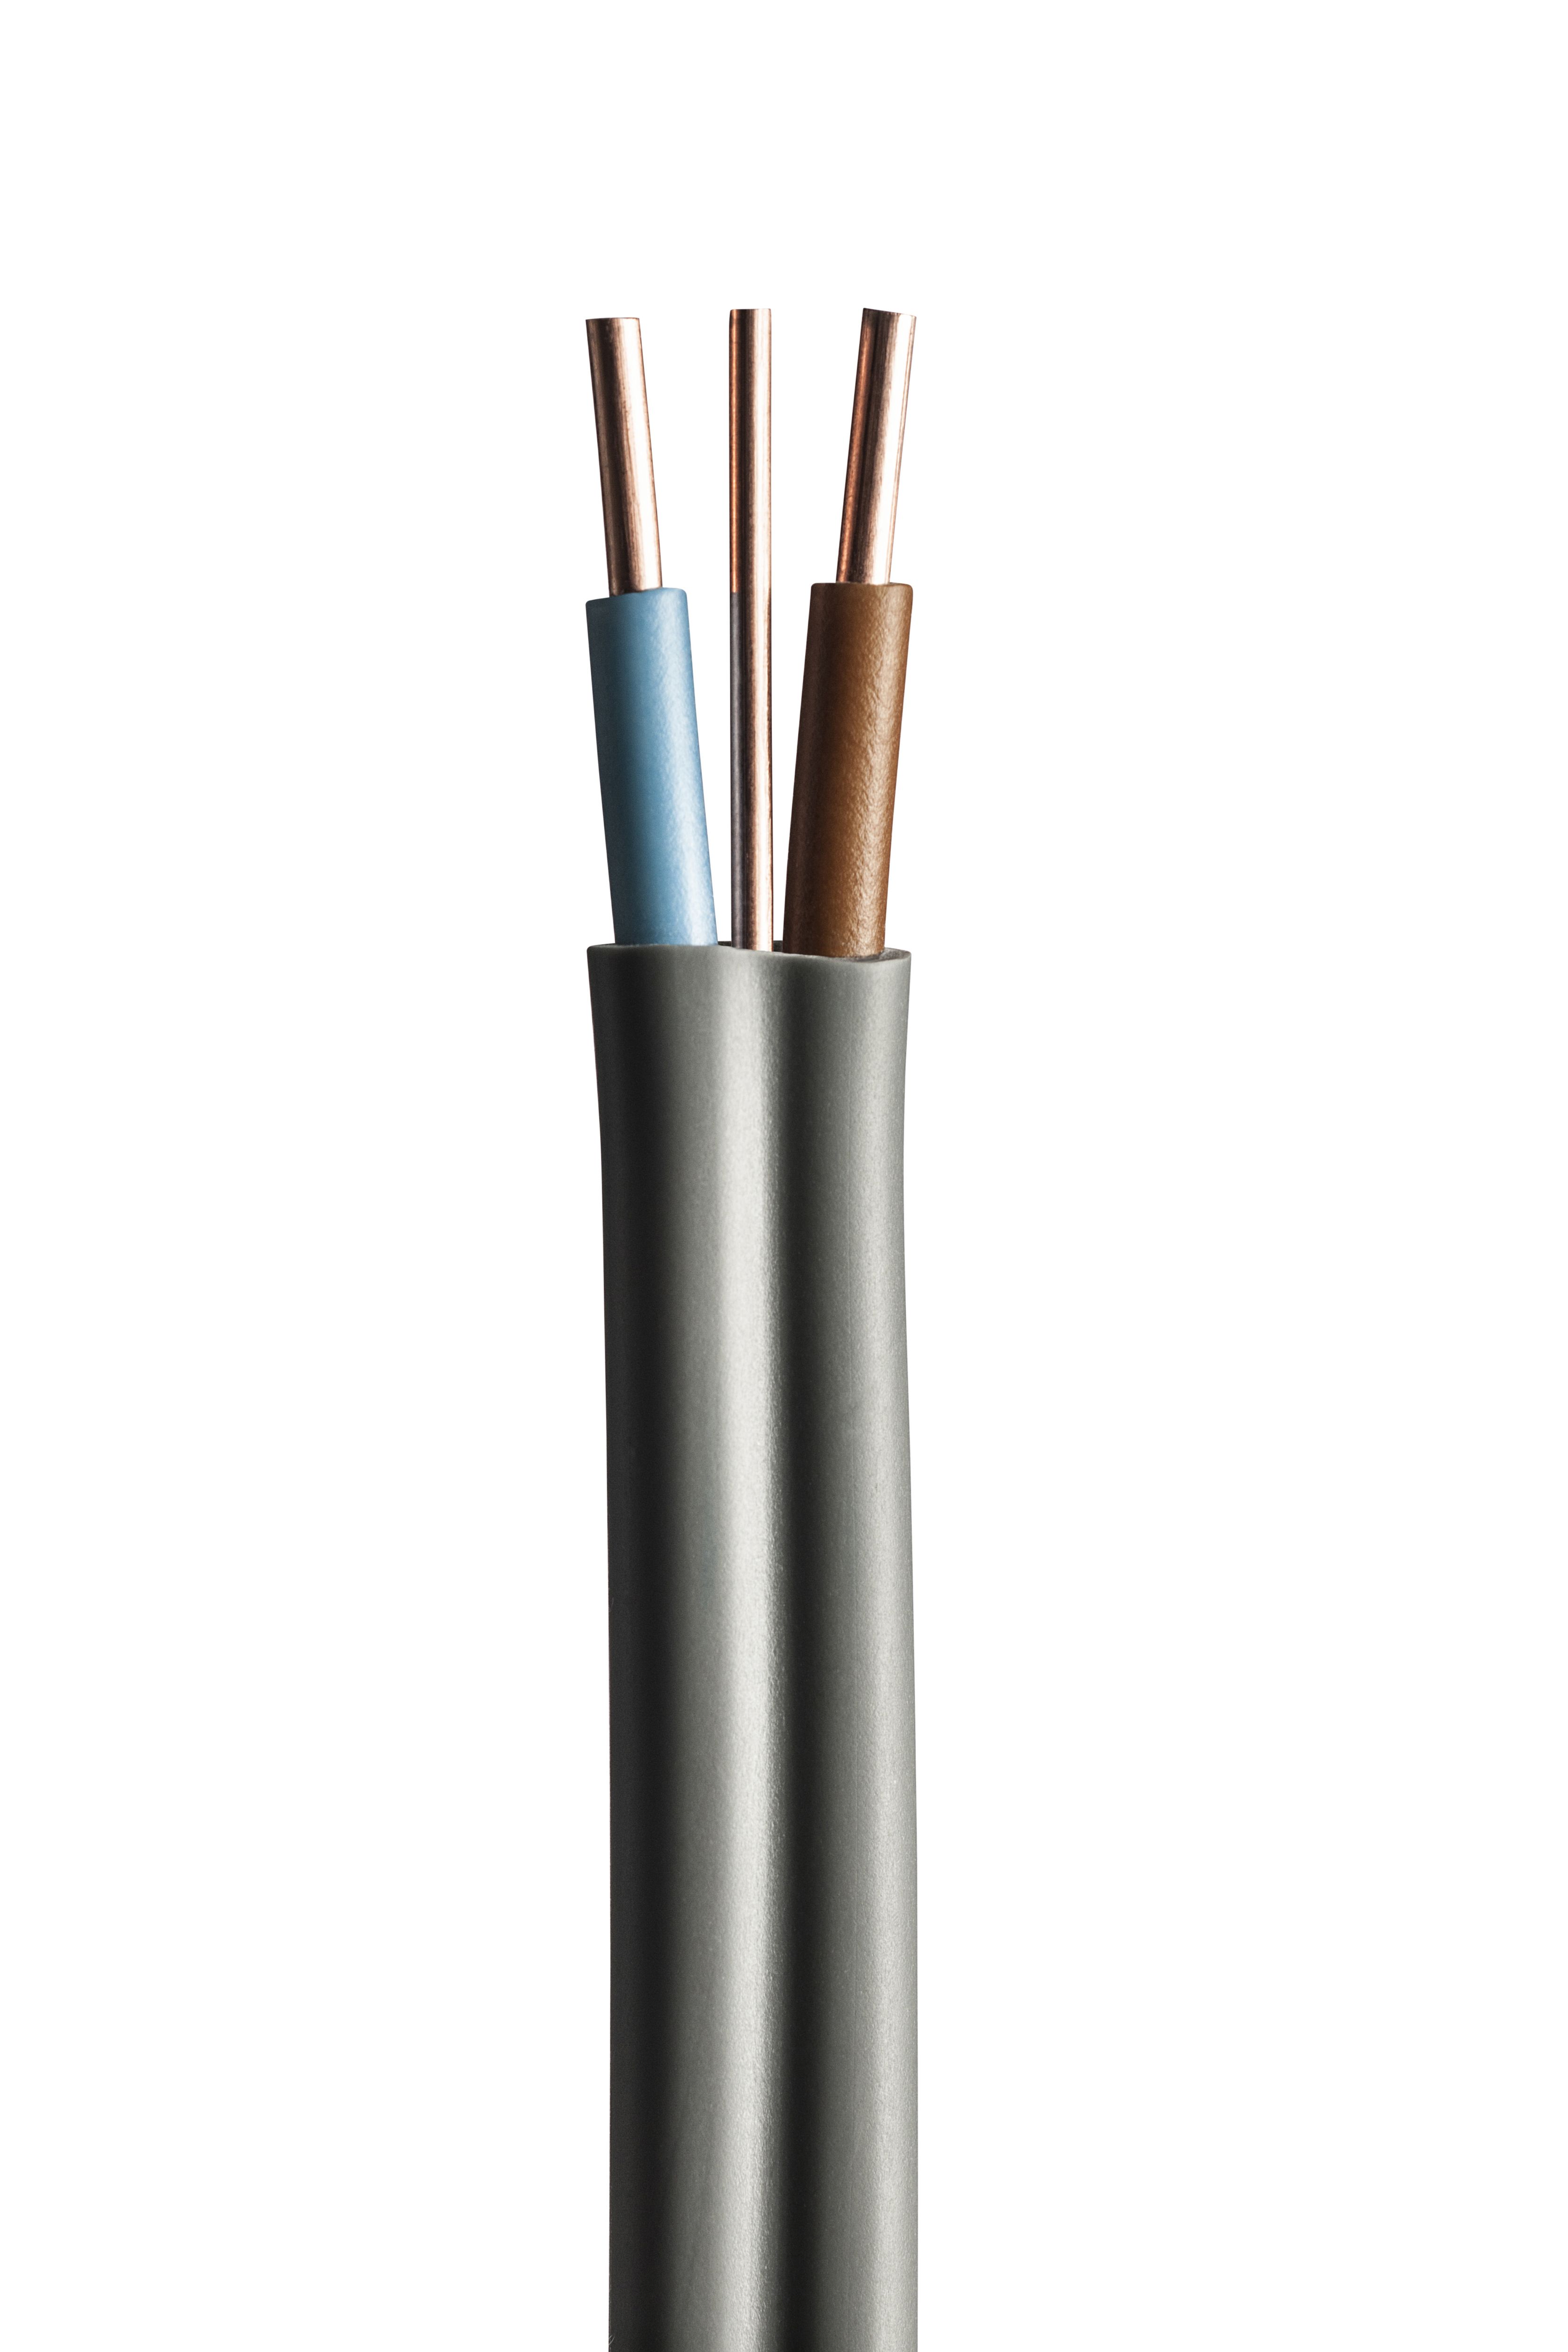 Prysmian 6242YH Grey 2-core Twin & earth Cable 2.5mm² x 10m